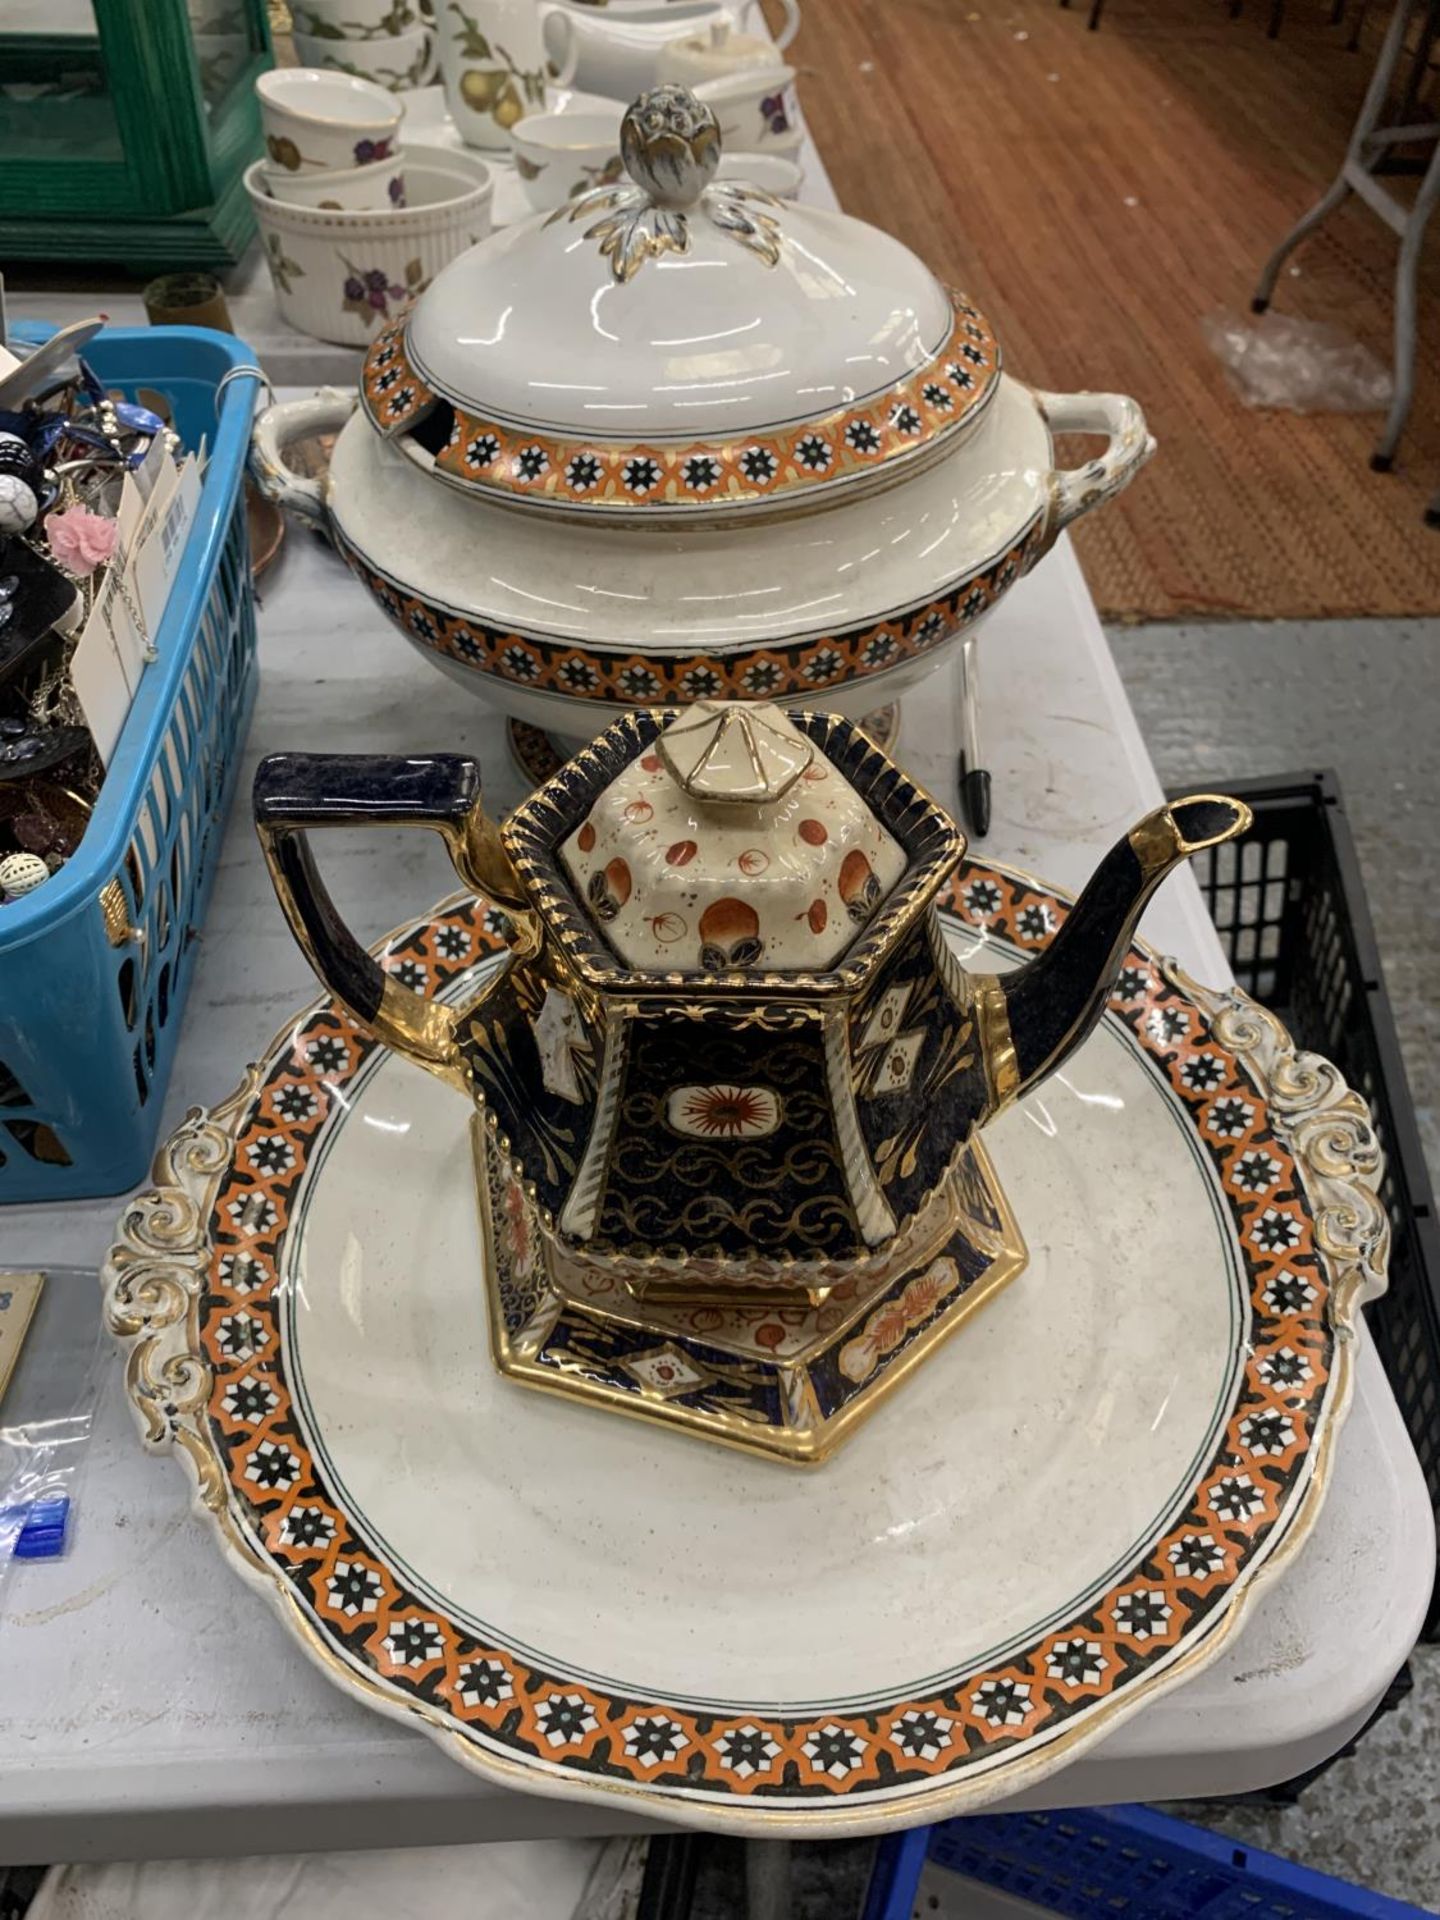 A MID 19TH CENTURY SOUP TUREEN AND PLATTER PLUS A VICTORIAN TEAPOT AND STAND